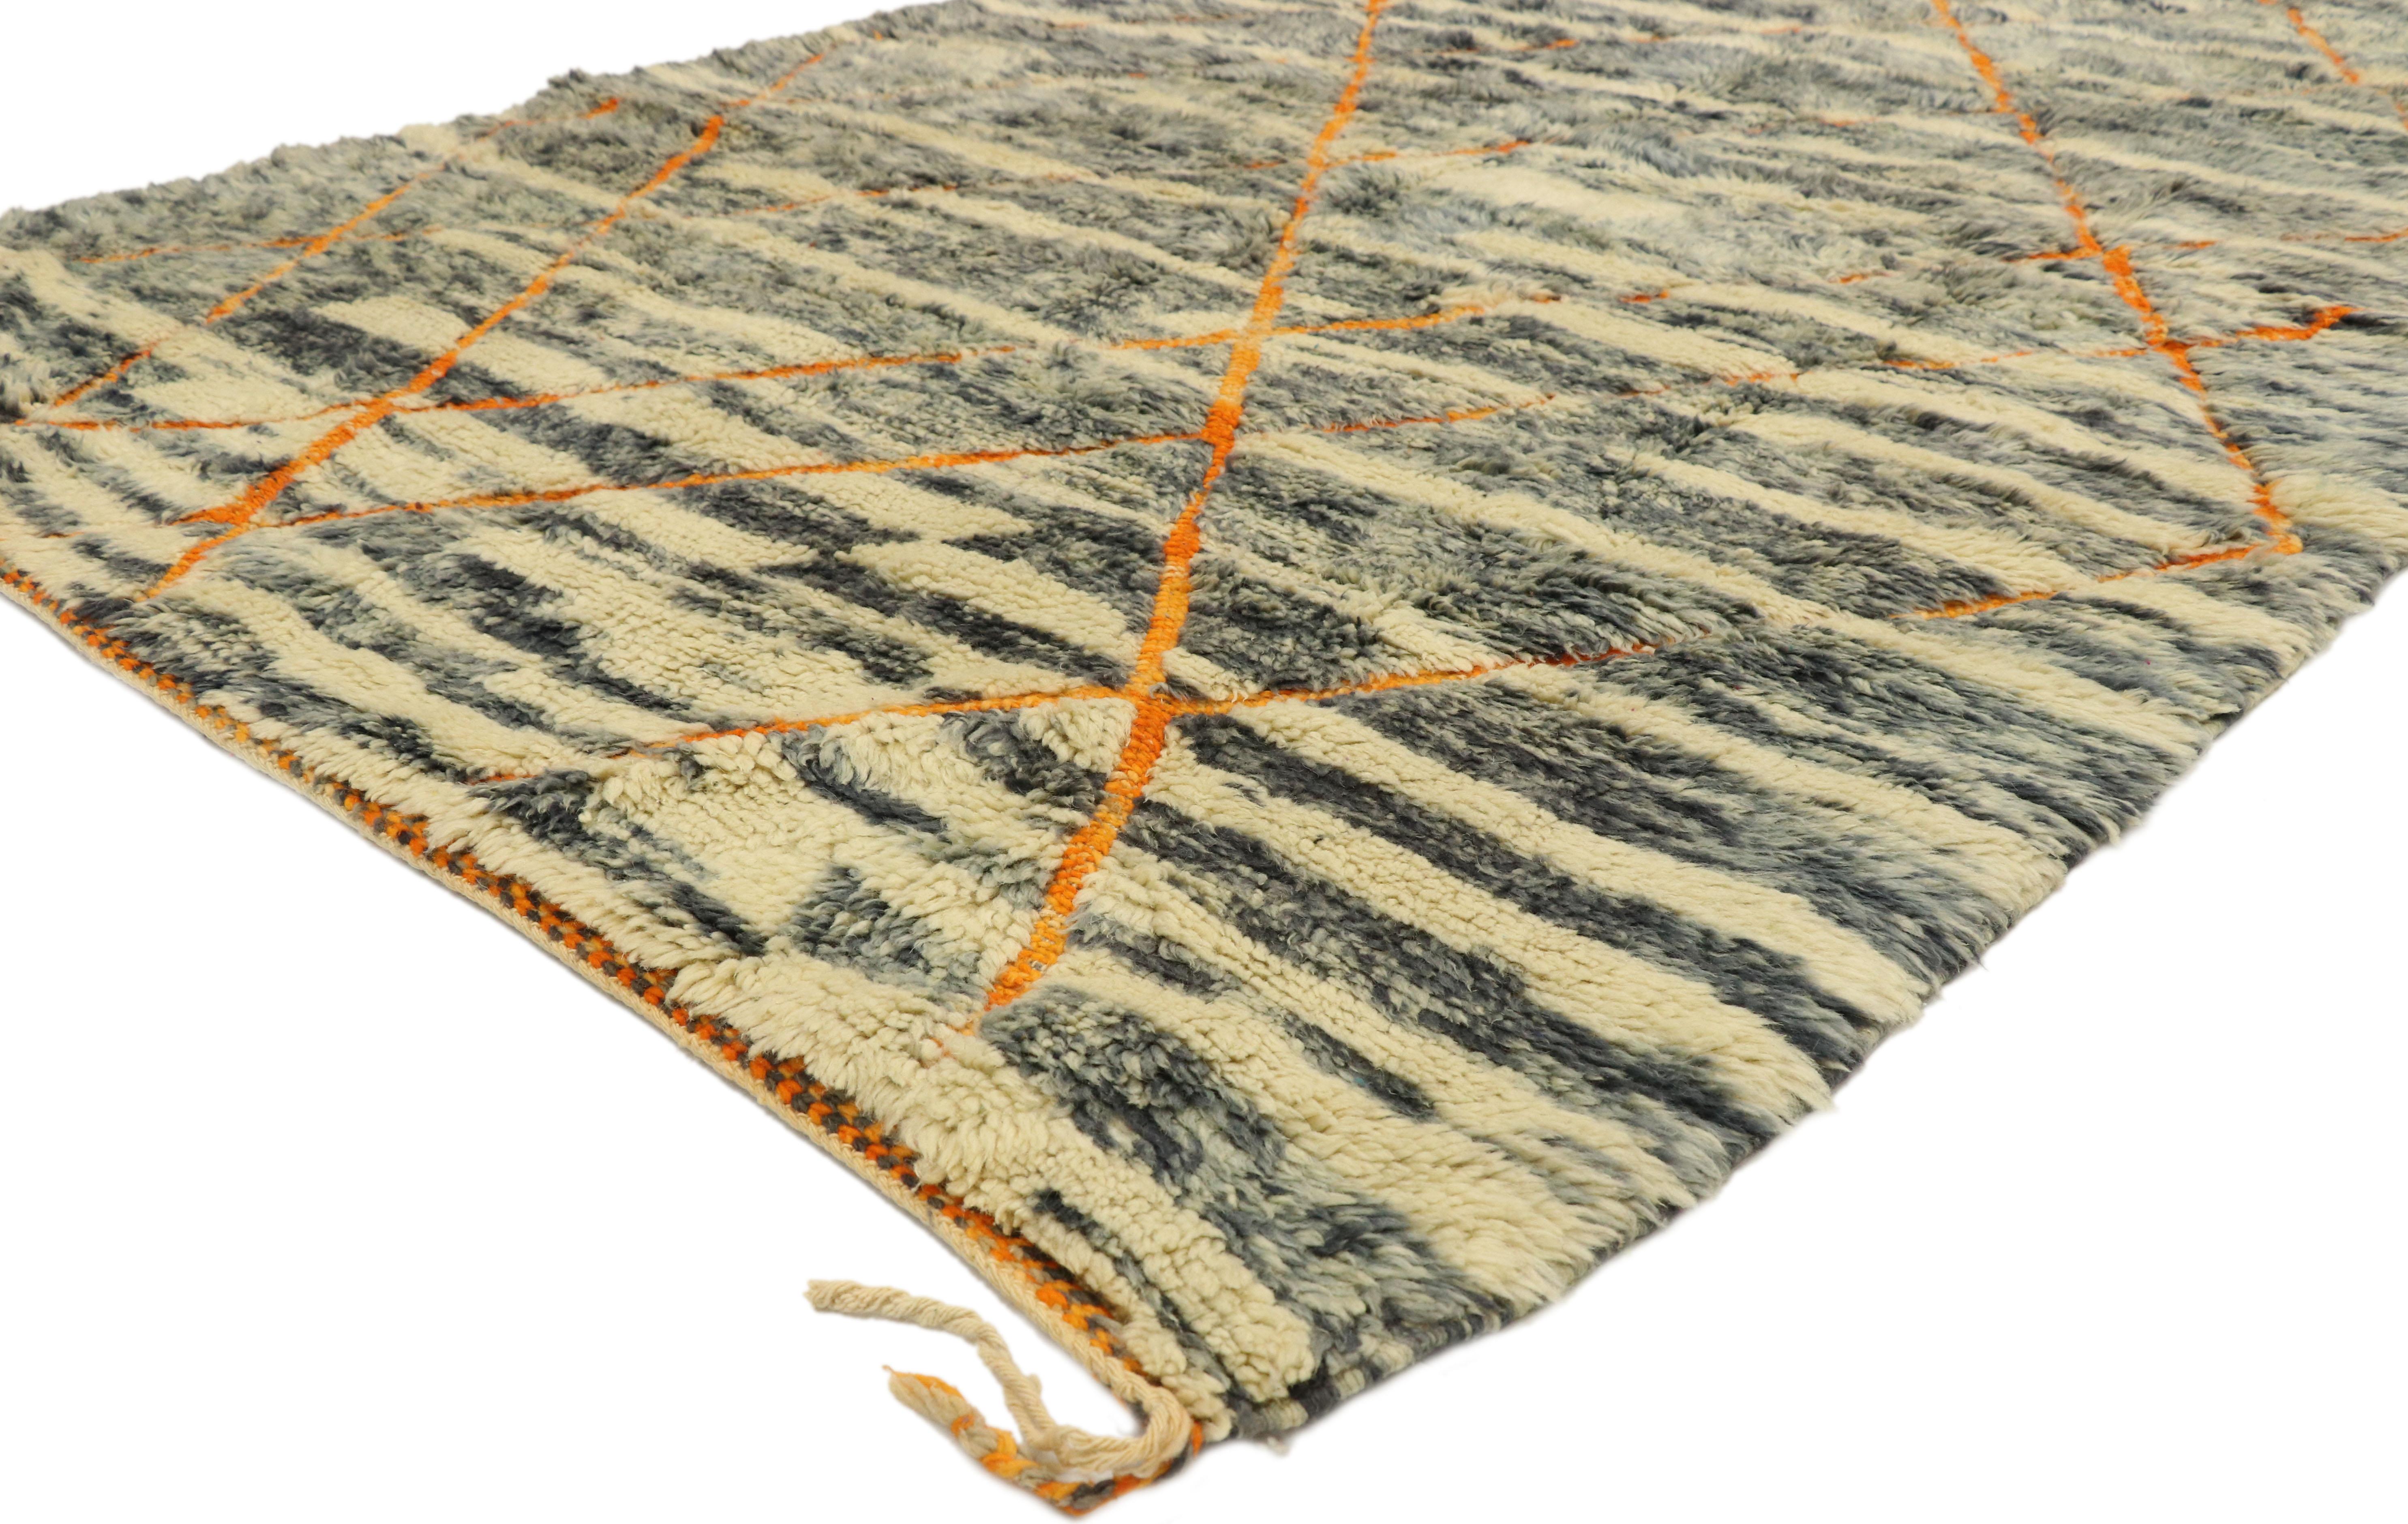 20993 New Contemporary Beni Mrirt Carpet, Berber Moroccan rug. This hand knotted wool contemporary Moroccan area rug features contrasting orange colored lines running the length of the abrashed cream and steel gray field. The asymmetrical lines